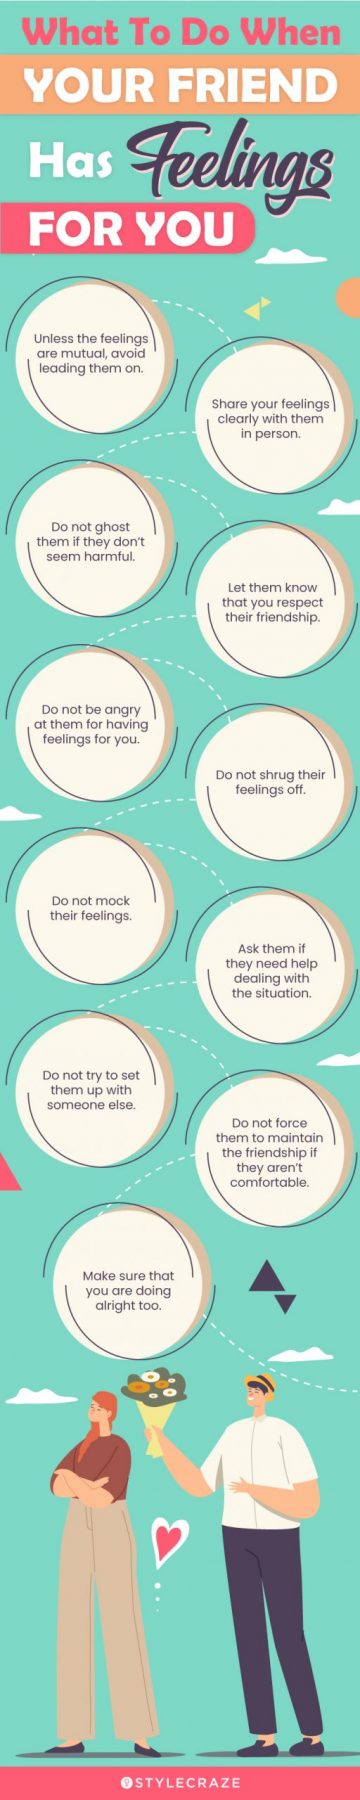 what to do when your friend has feelings for you (infographic)